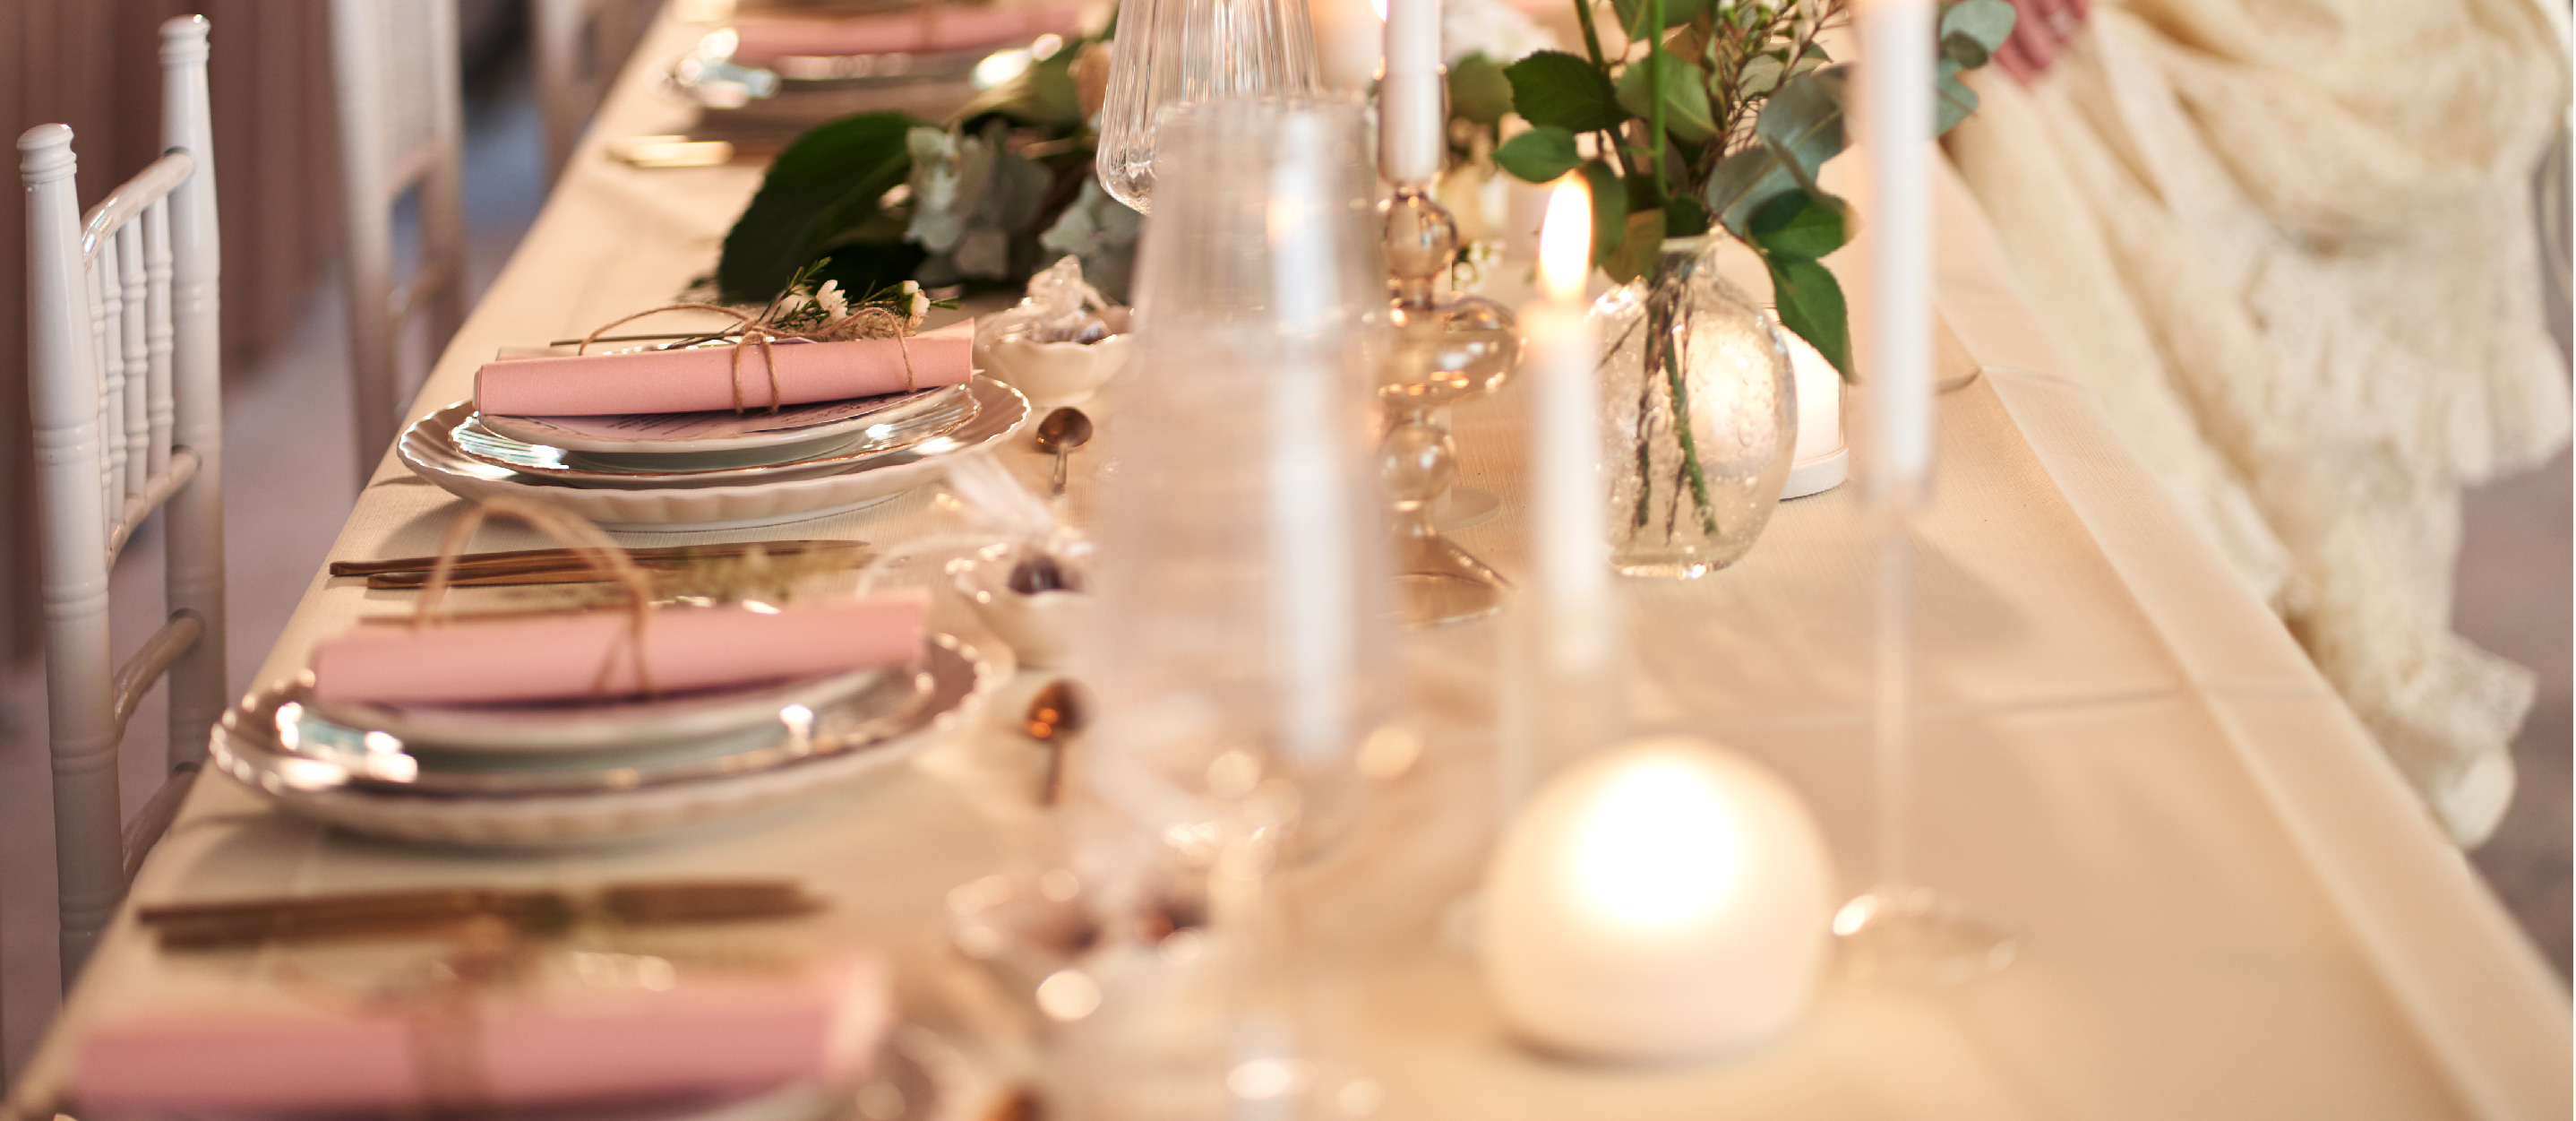 A table set for a wedding with Bio Dunisoft pink napkins, white stearin candles, led lights, Laponian holders and flowers.